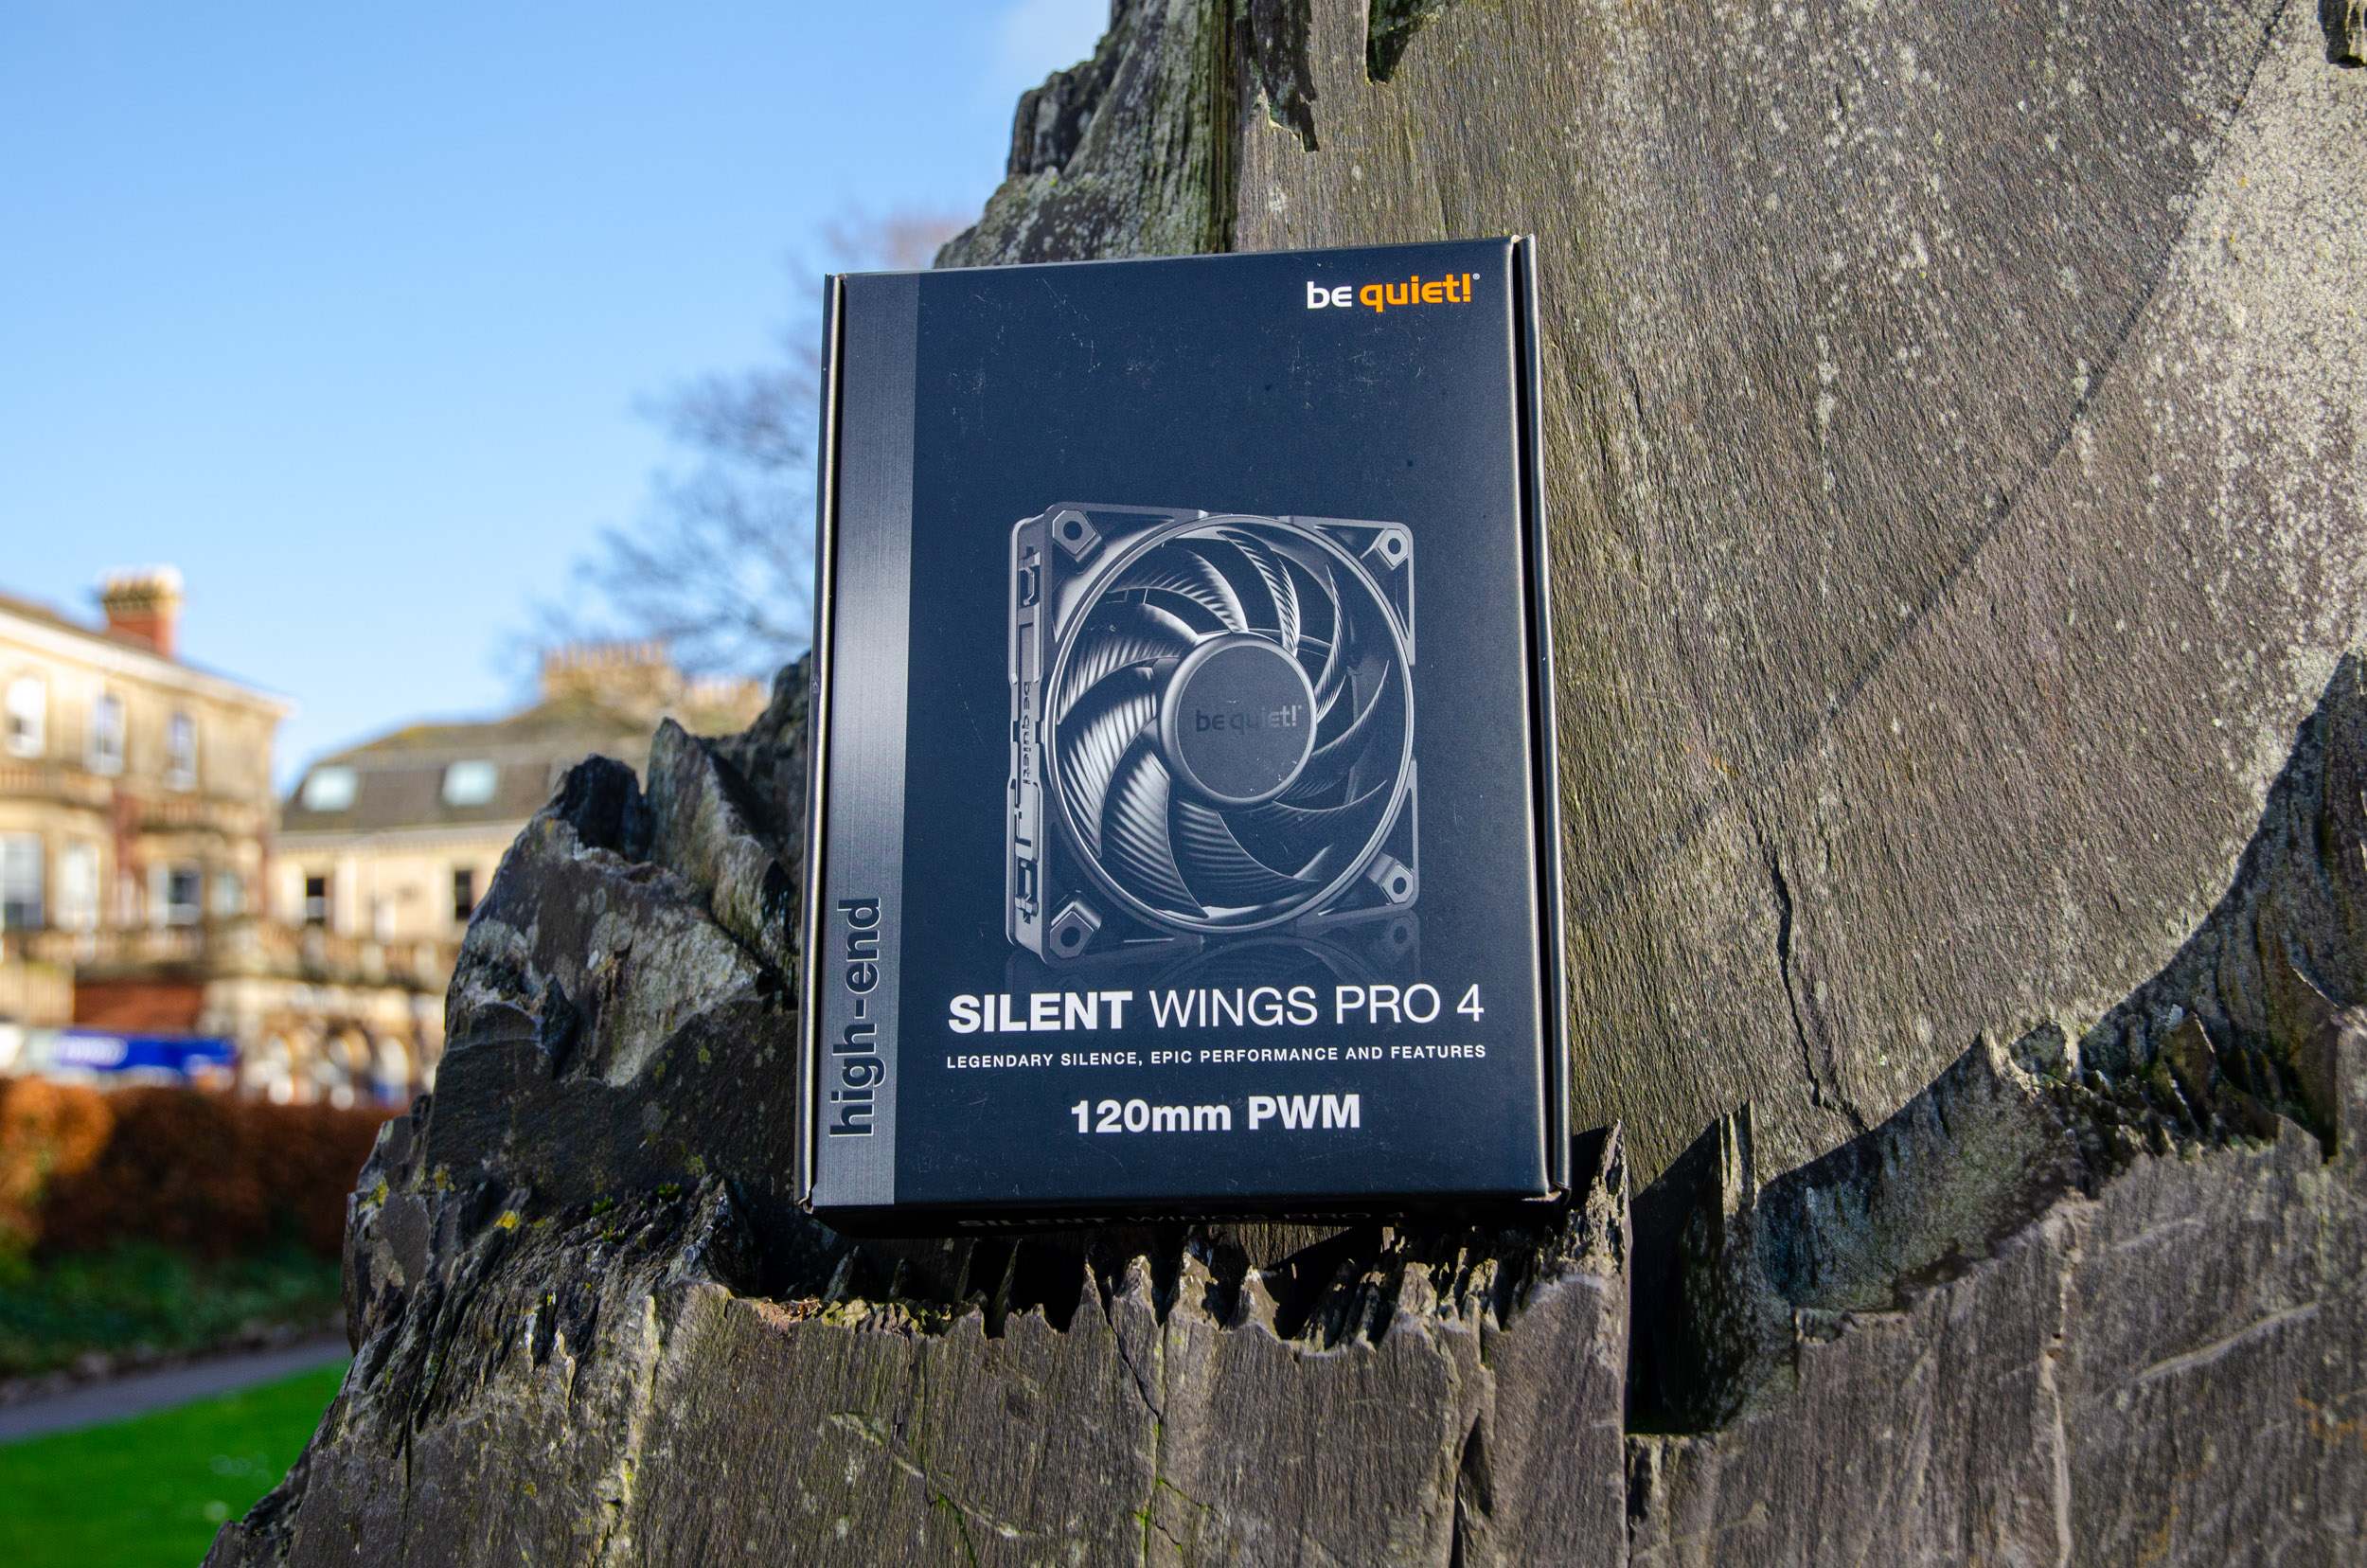 4 be Pro Glob3trotters | 120mm Wings quiet! Silent